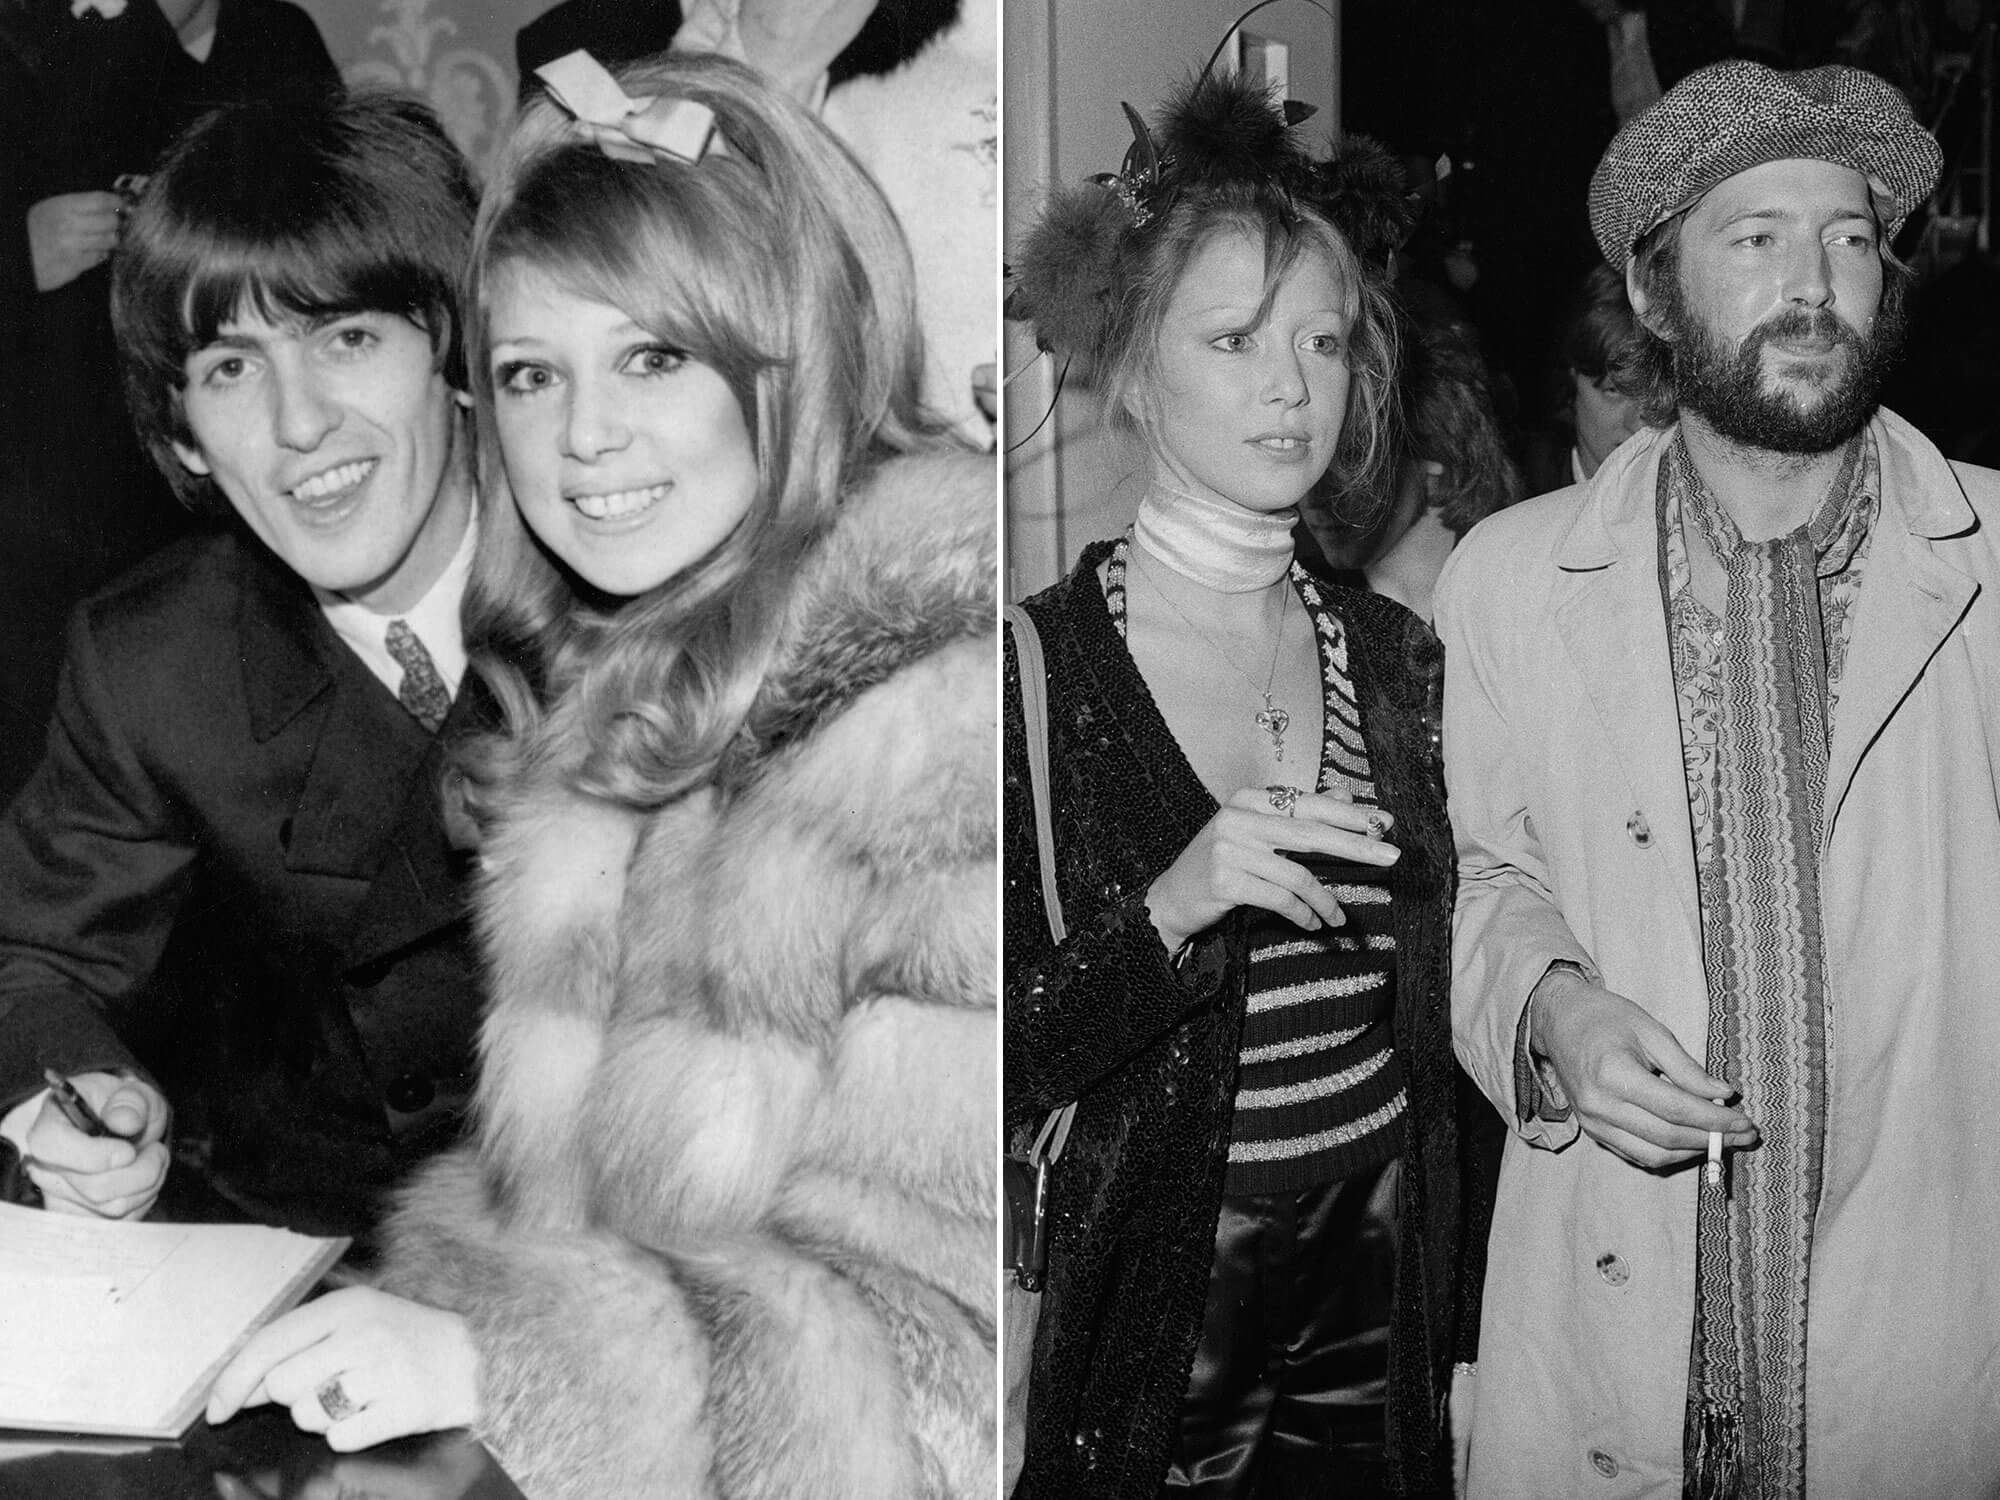 [L-R] George Harrison with Pattie Boyd, and Eric Clapton with Pattie Boyd